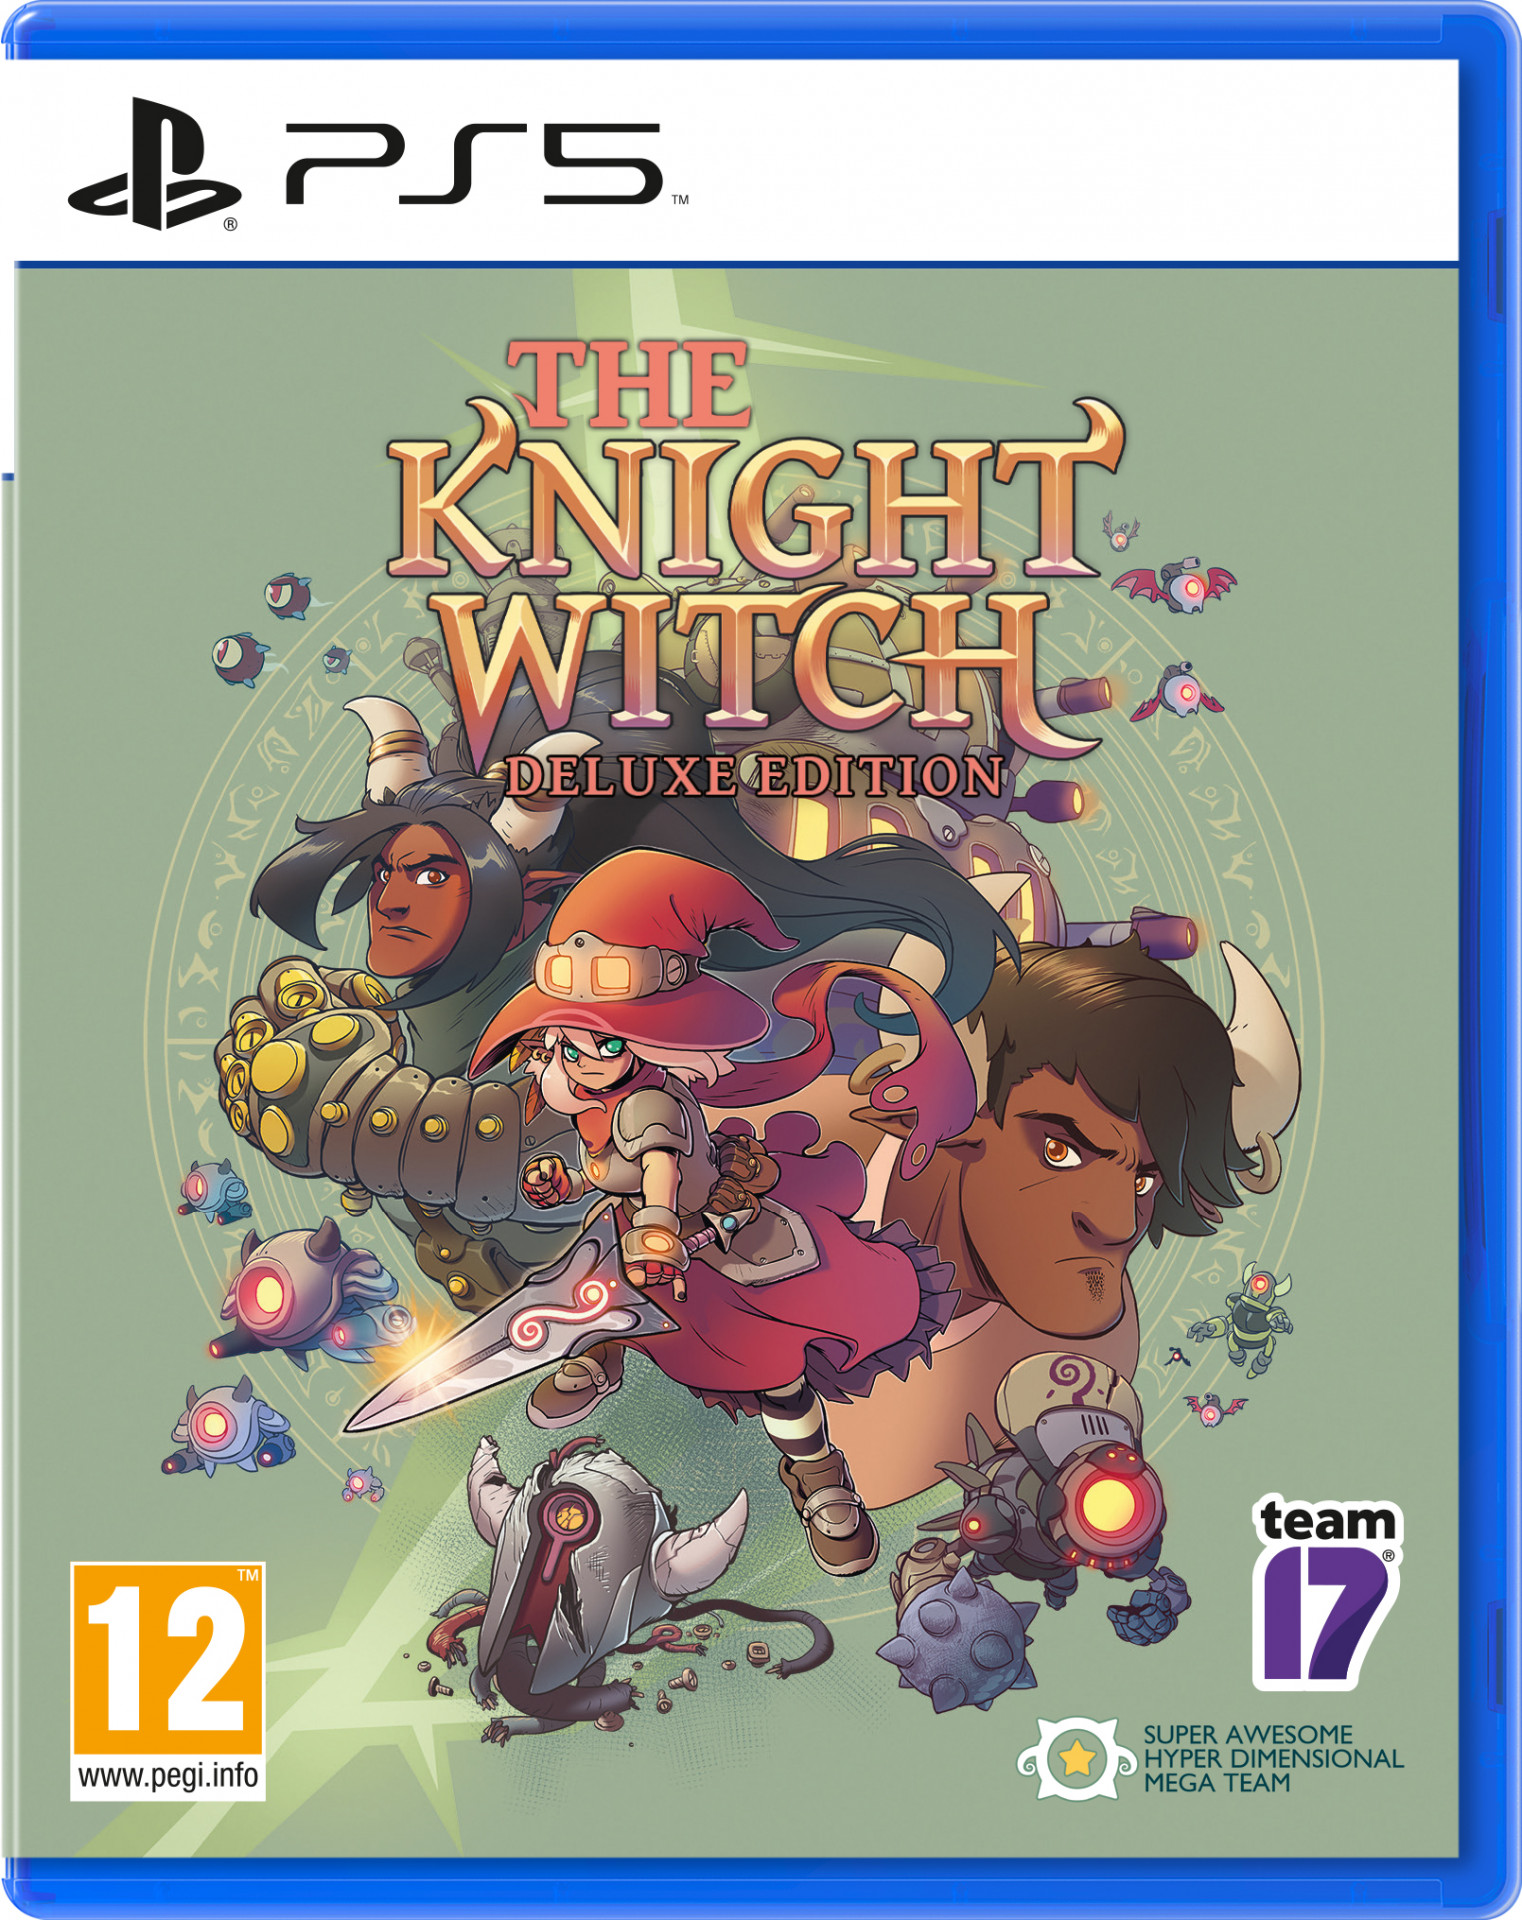 The Knight Witch - Deluxe Edition (PS5), Team 17